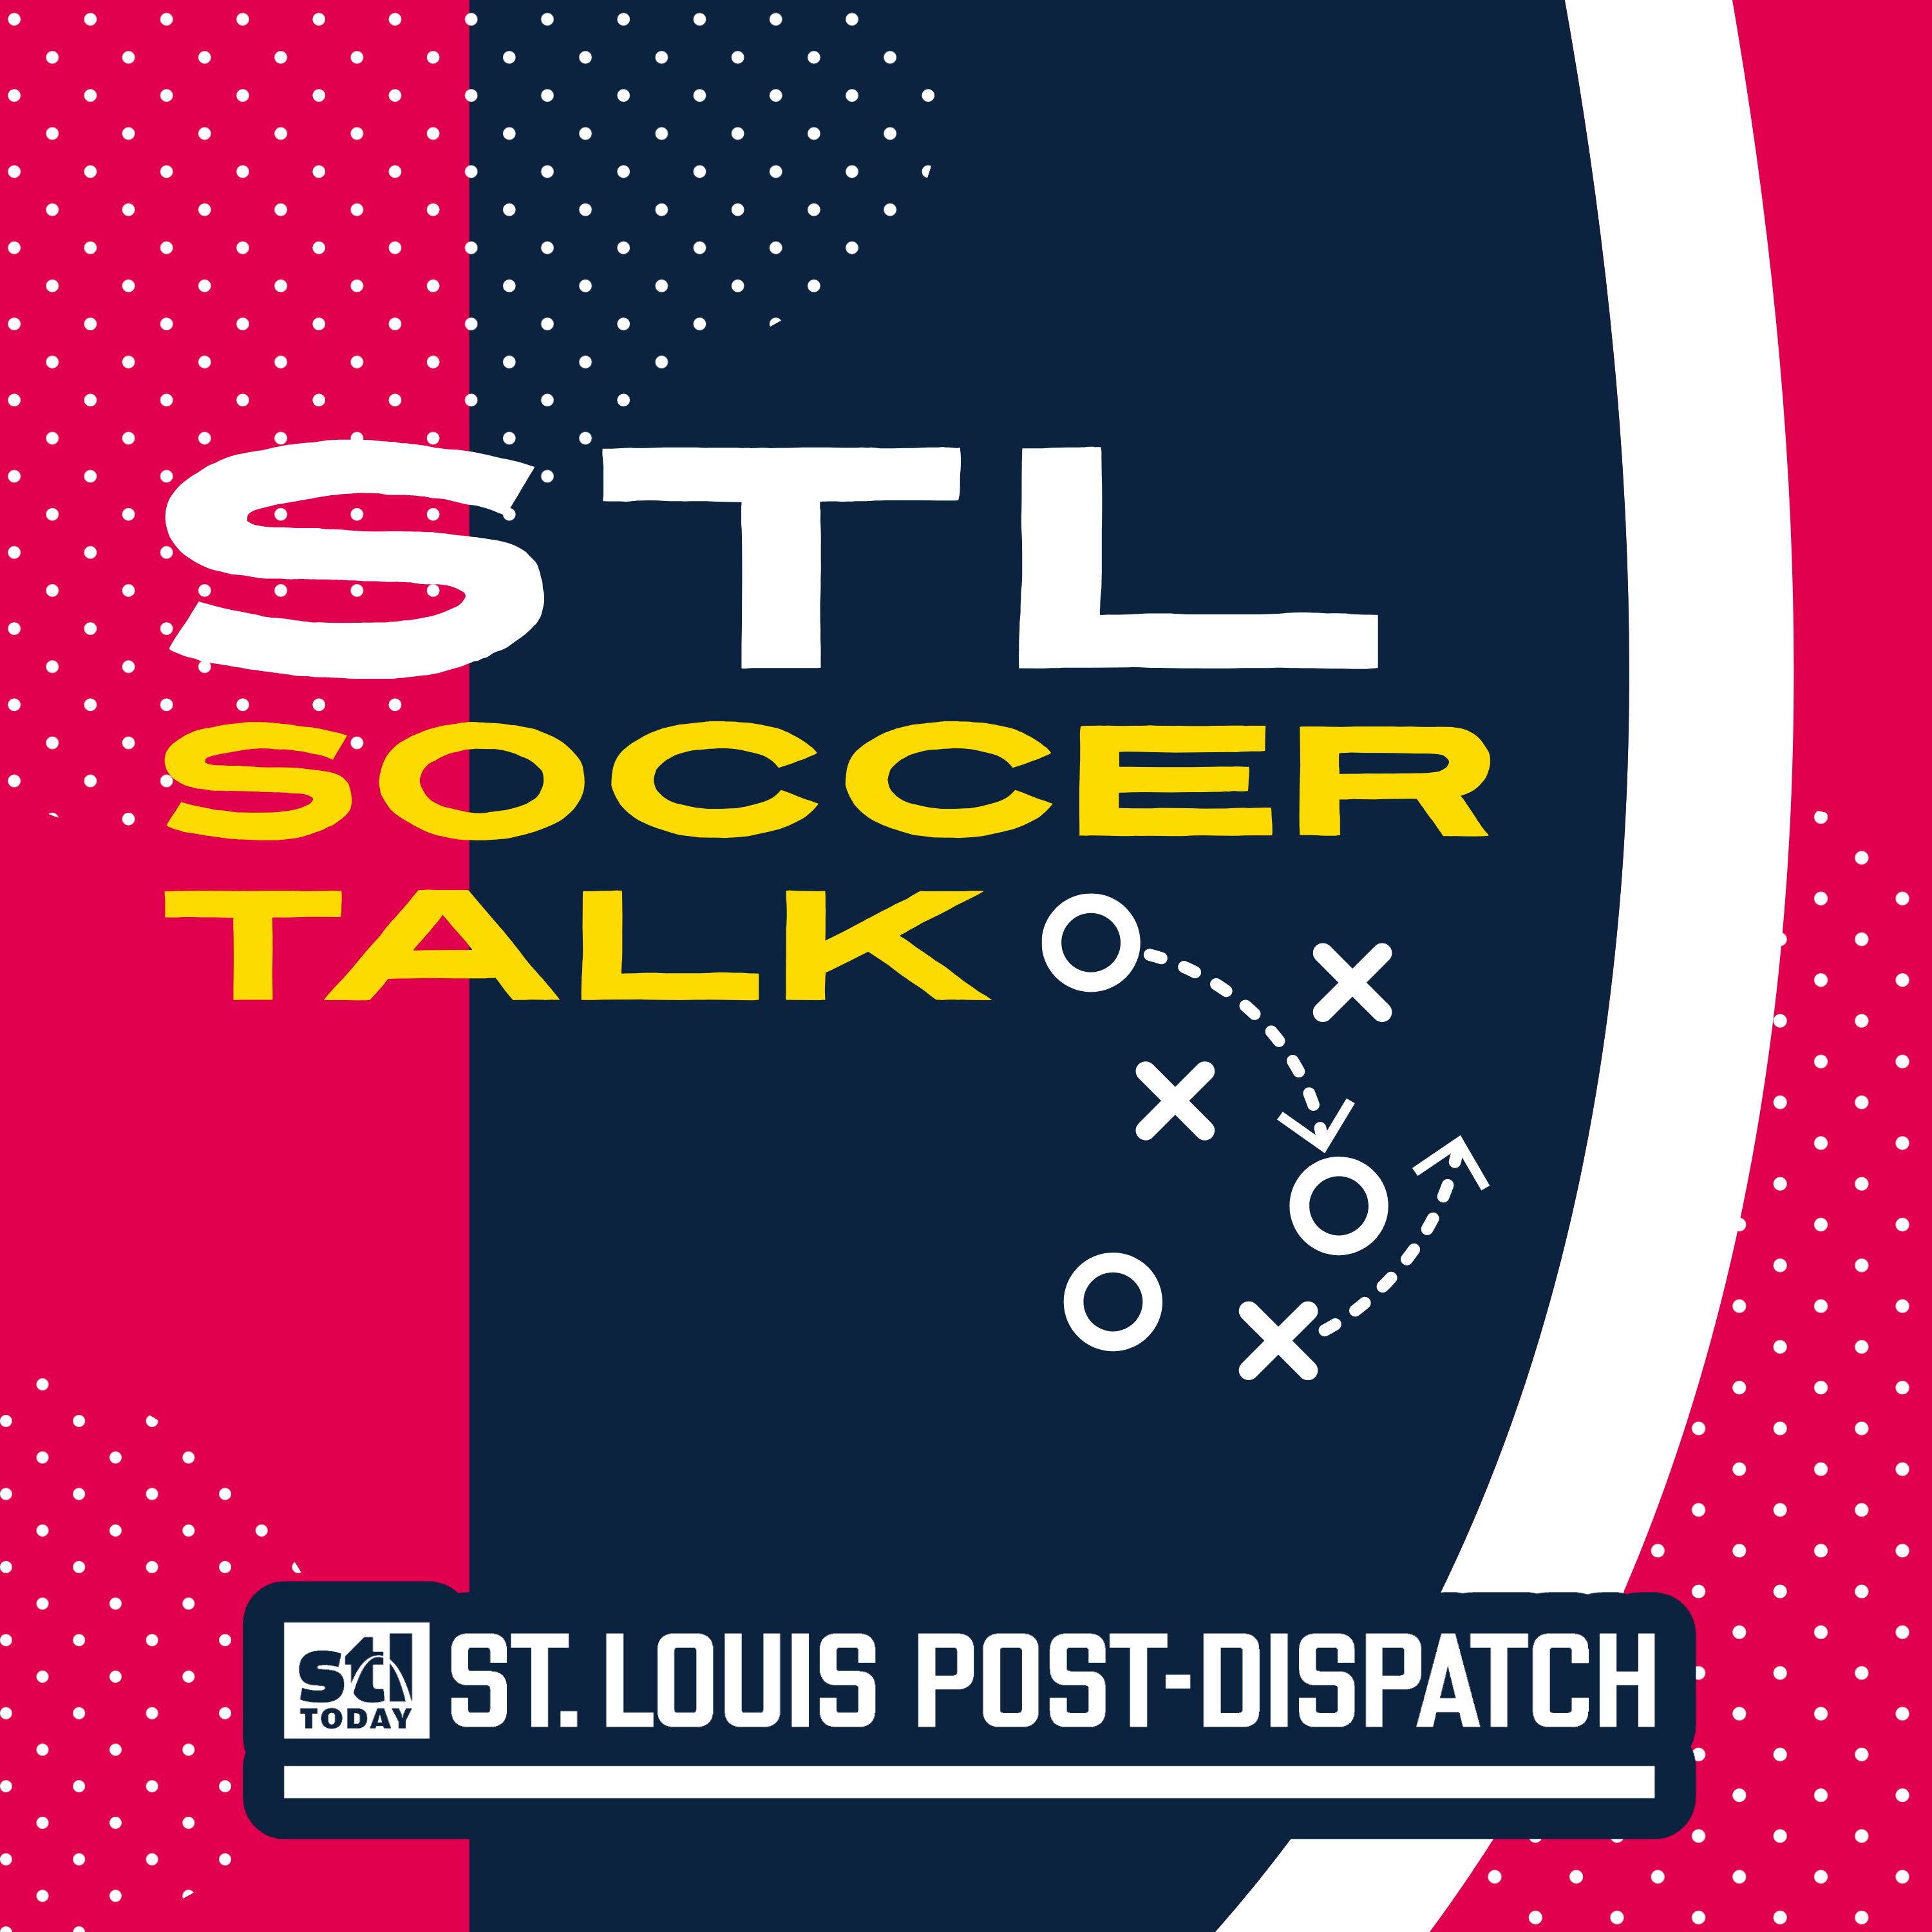 St. Louis City SC's depth will get tested as the team tries to